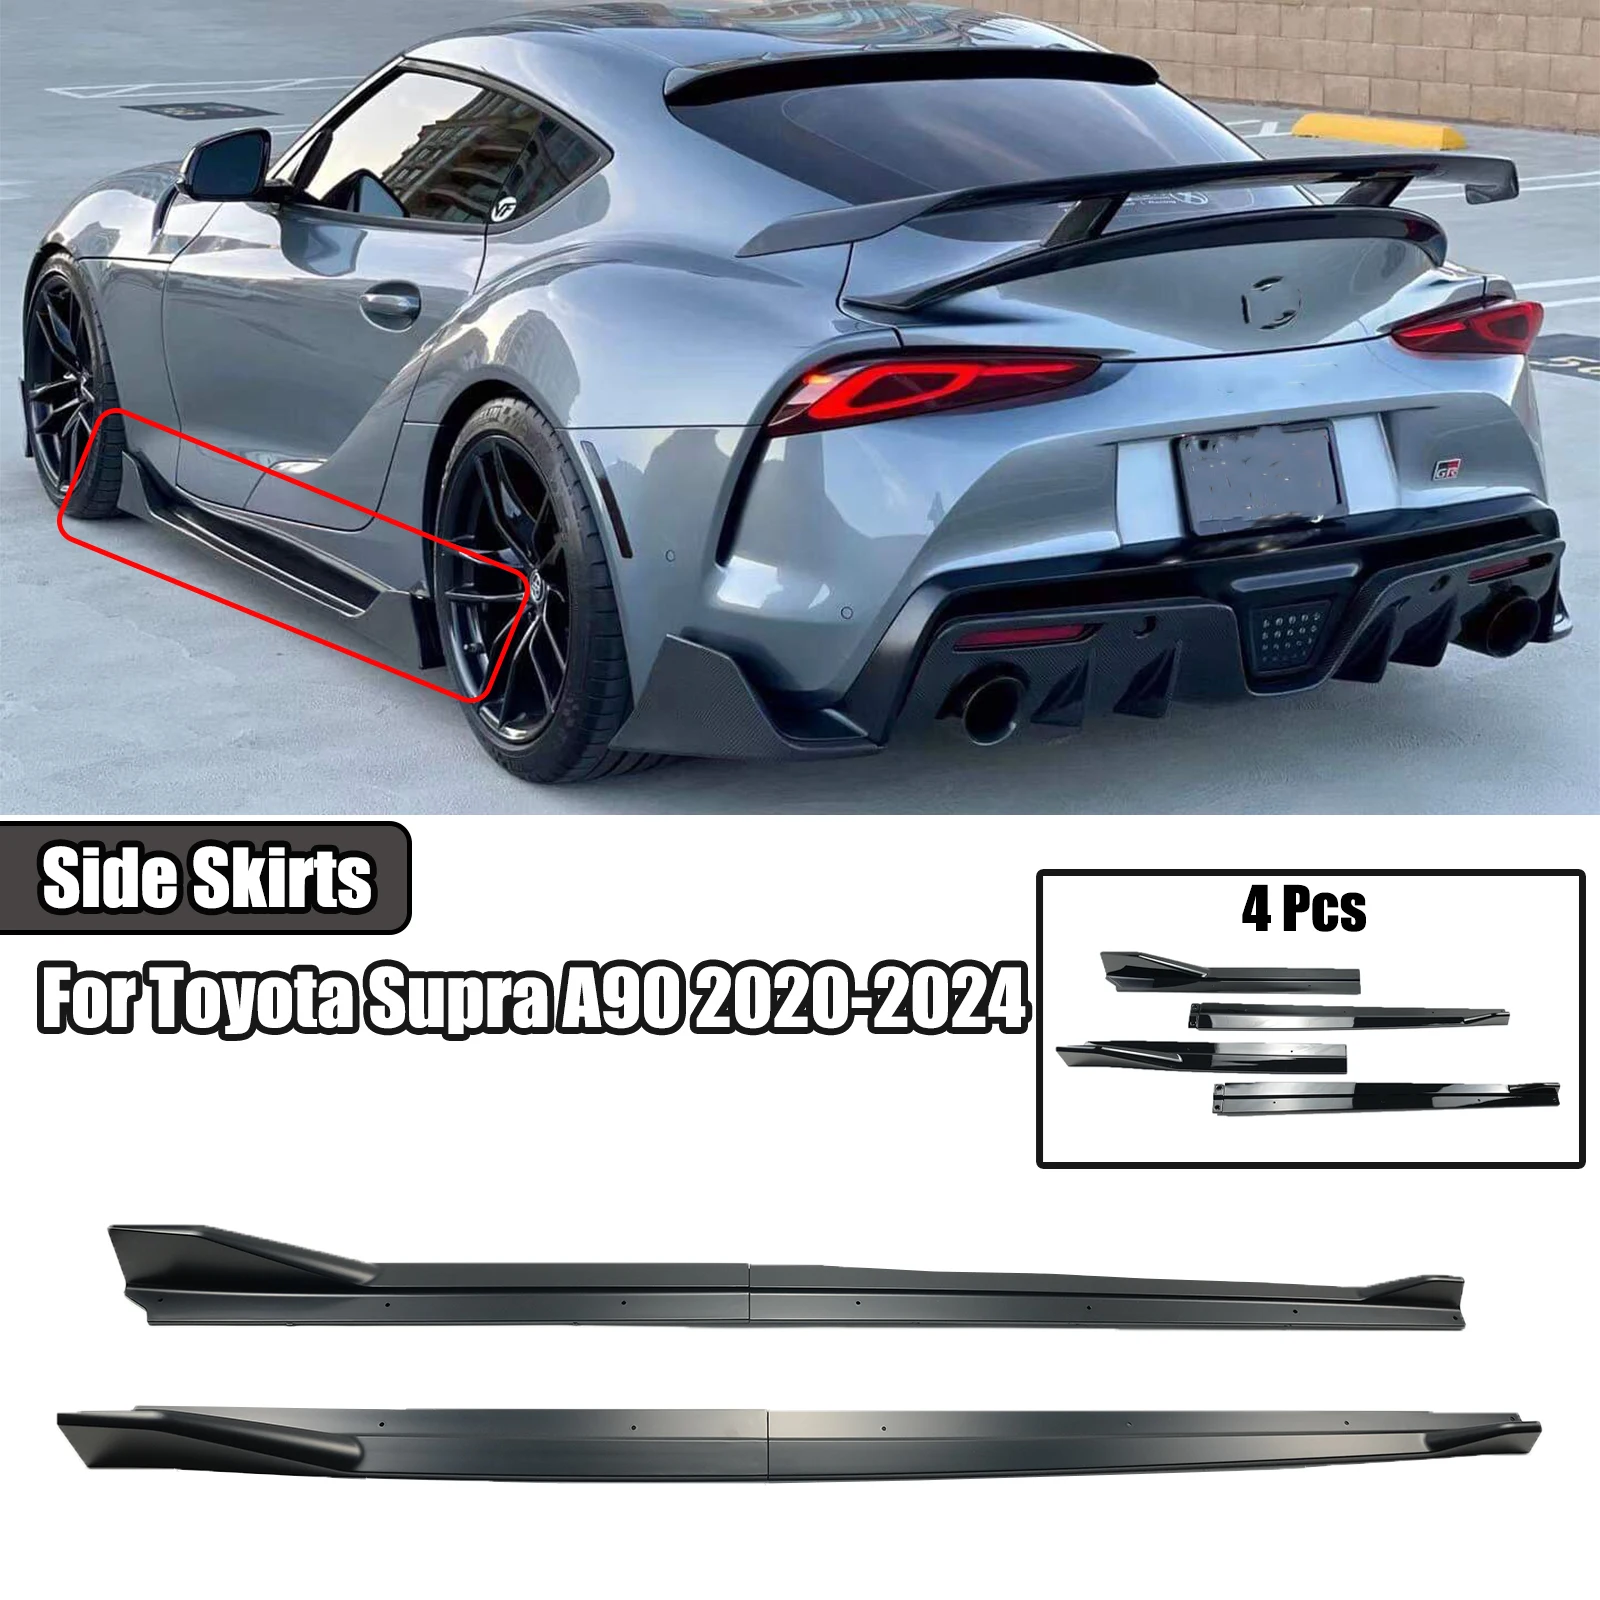 

Car Side Skirt Extension Splitter For Toyota Supra A90 A91 2020-2024 AG Style Spoiler Diffuser Glossy Black Carbon FIber Look